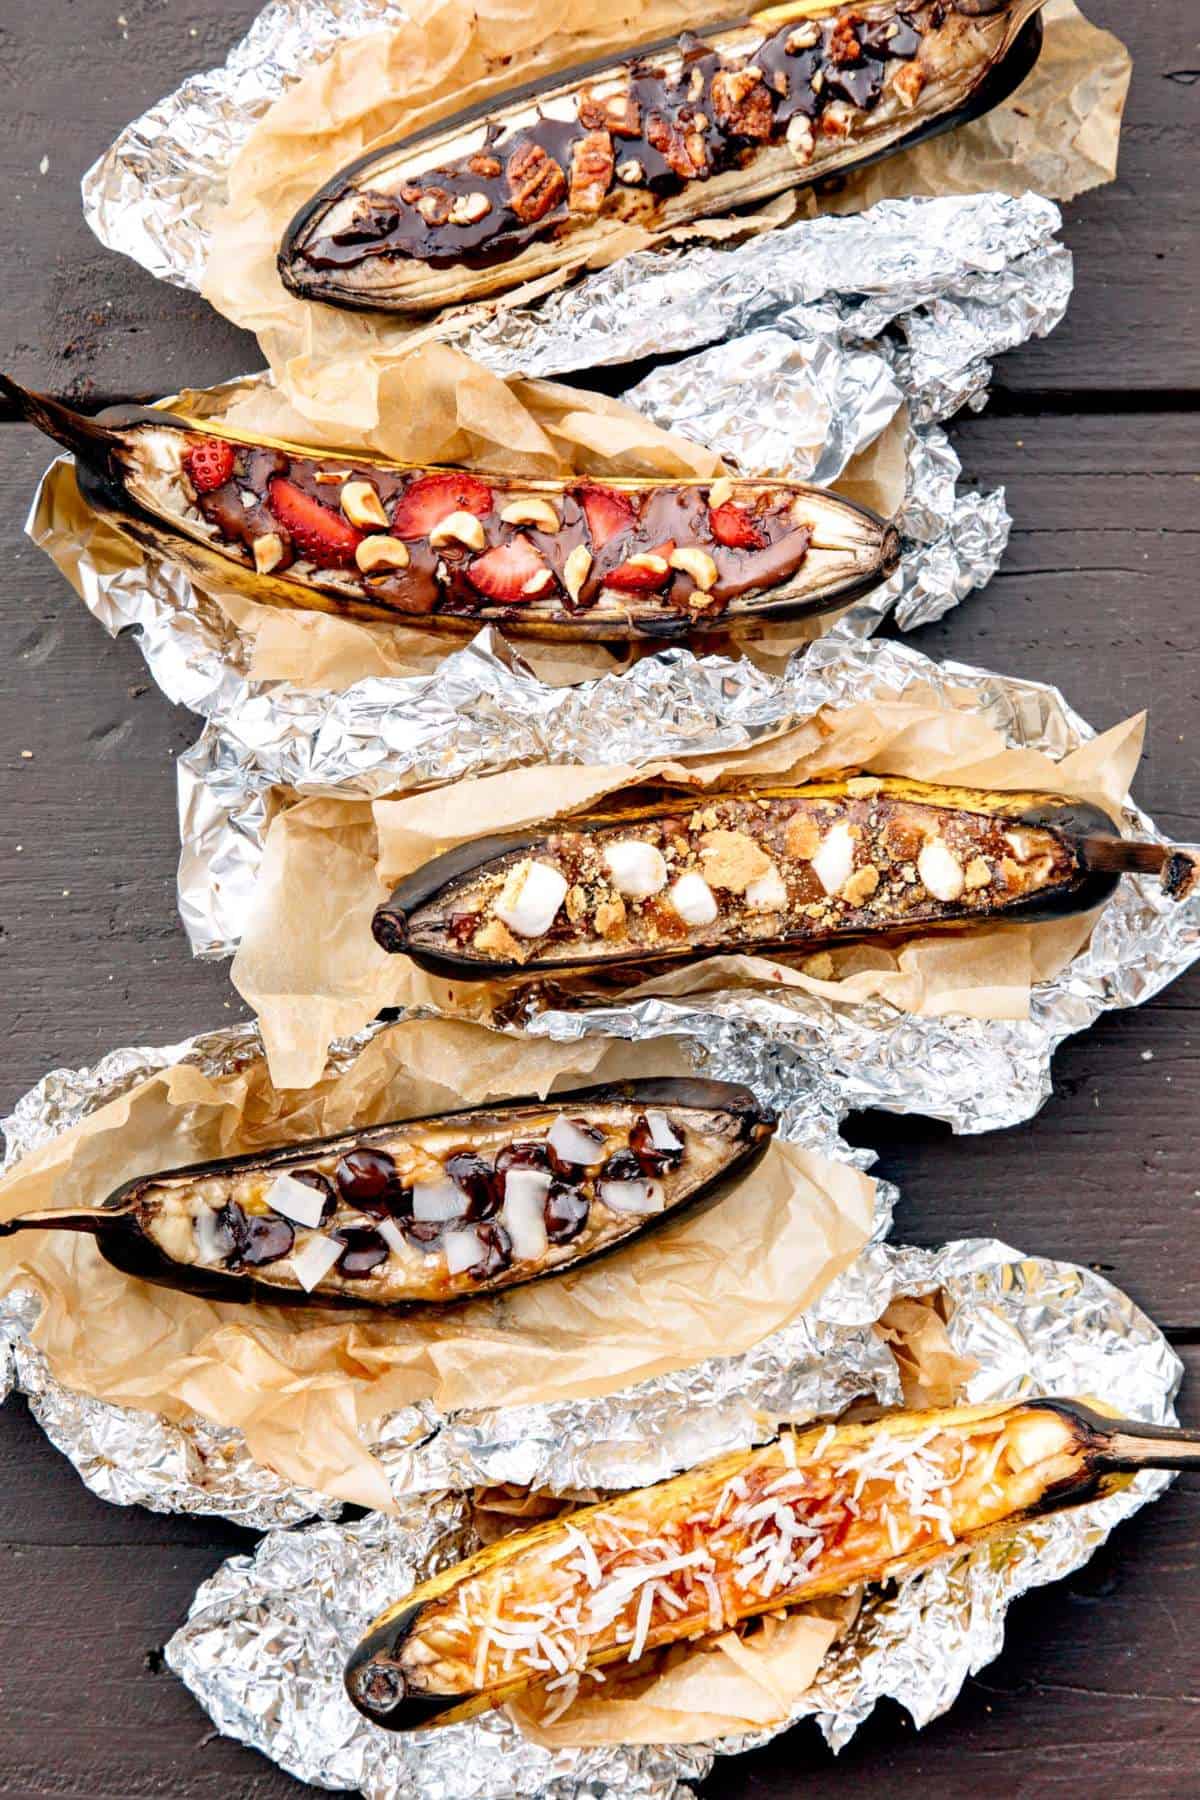 Campfire Banana Boats with different fillings